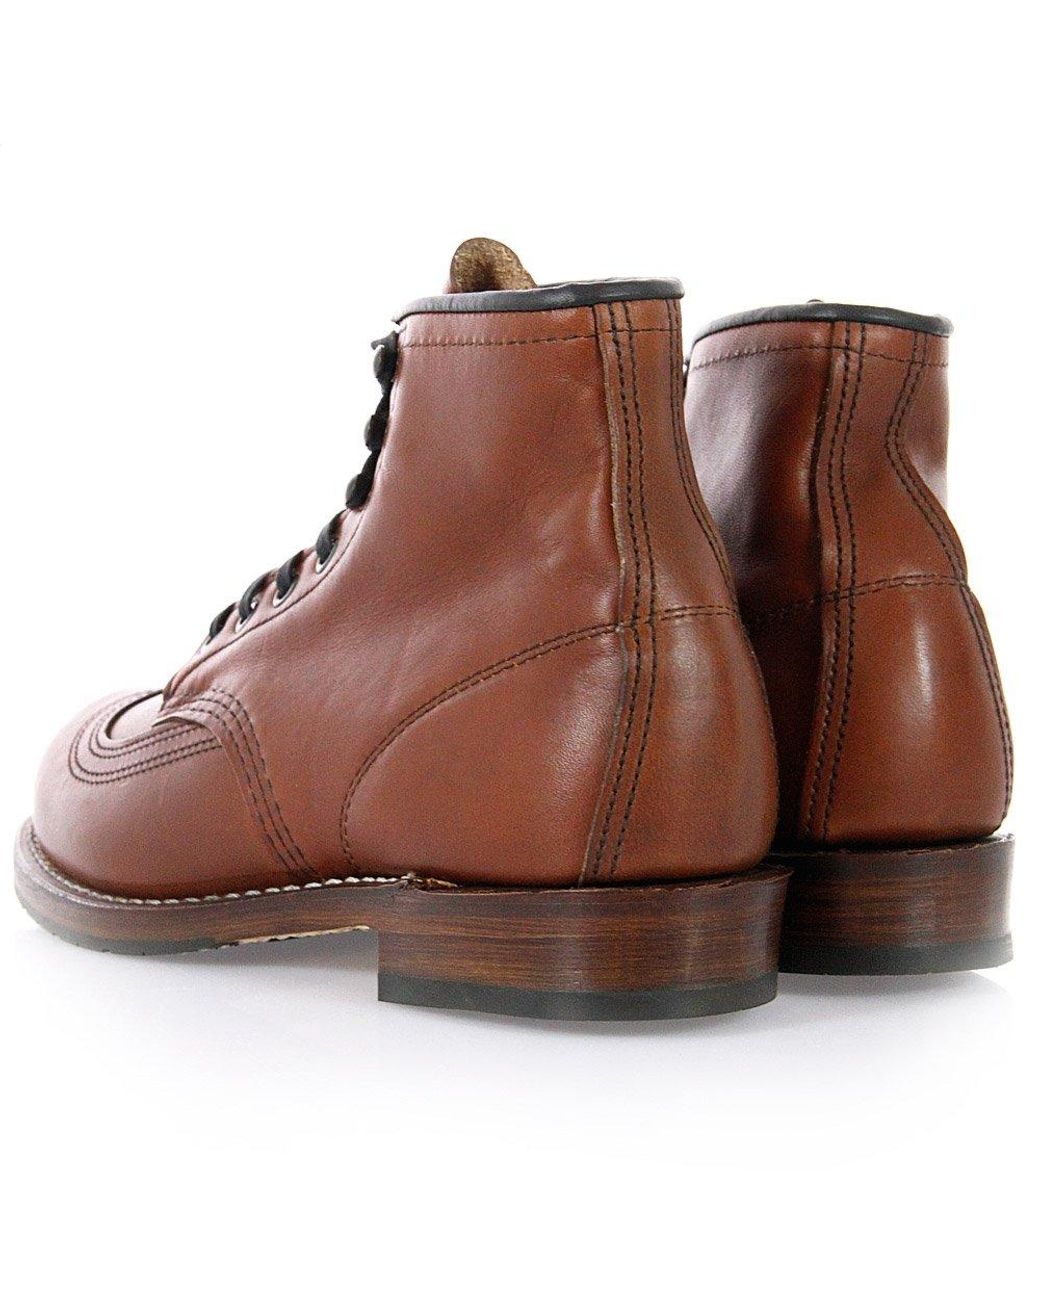 Red Wing Beckman Boot - Cigar Size 7.5 (Open Box) - Arcane Supply Co.